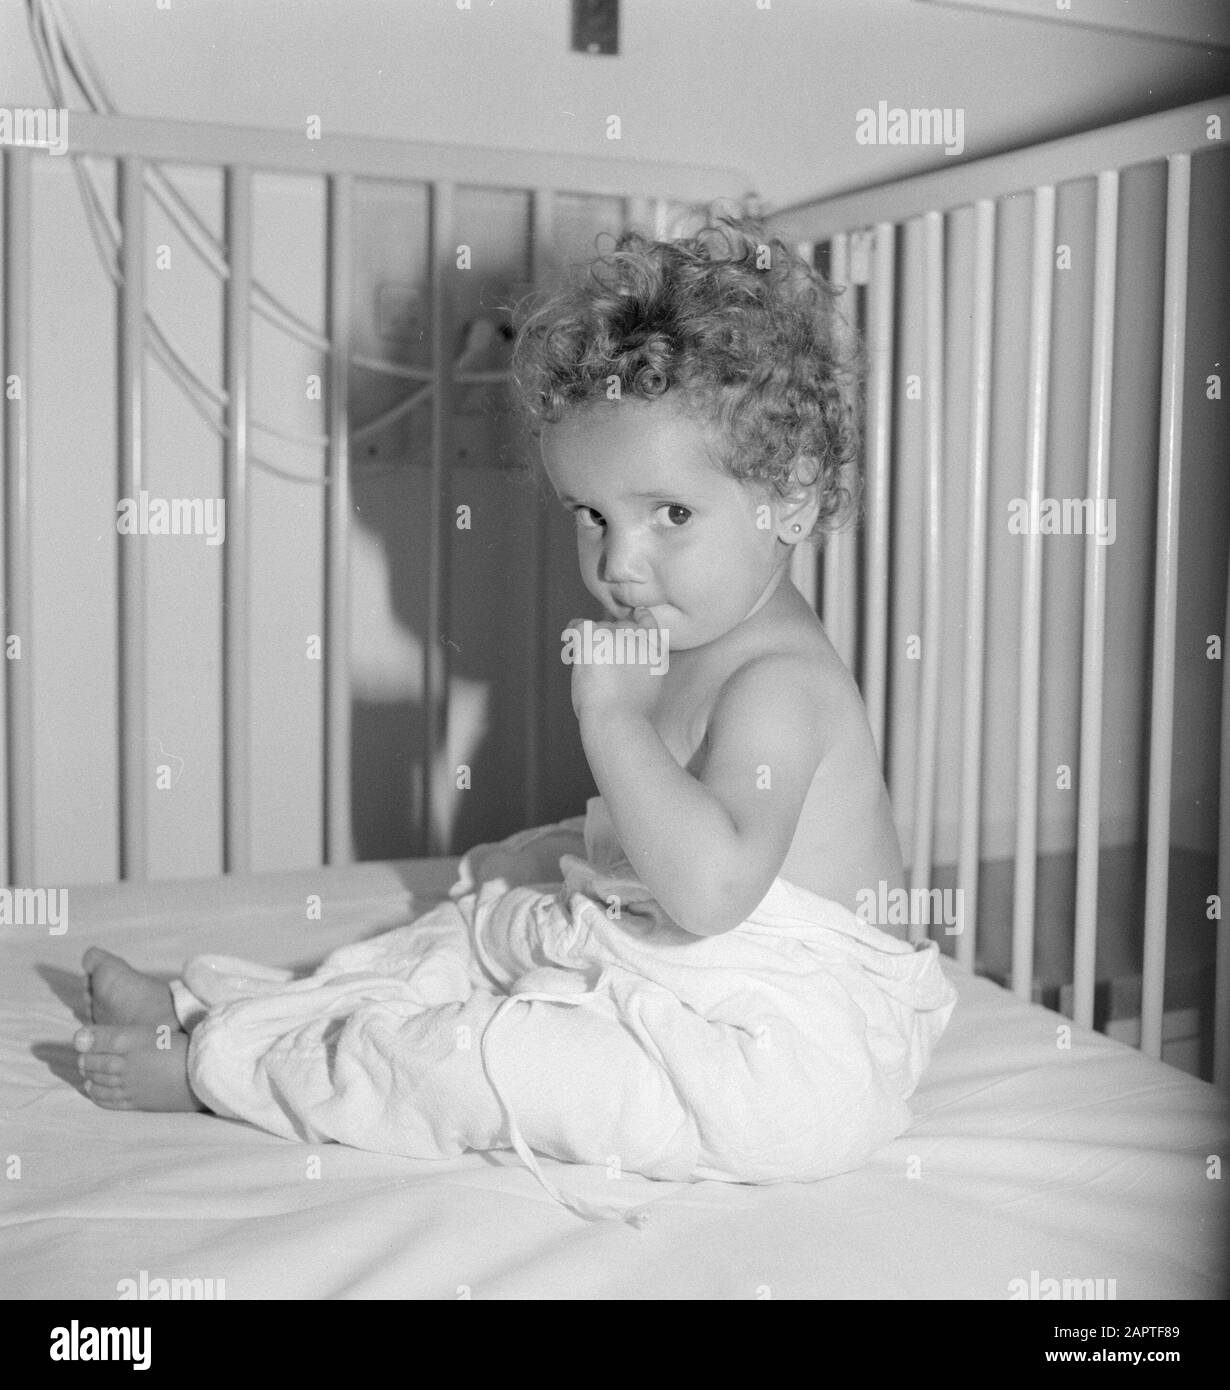 Hadassah university medical center. Department of Pediatrics. A patientje in bed Date: 1960 Location: Israel Keywords: beds, children, hospitals Stock Photo